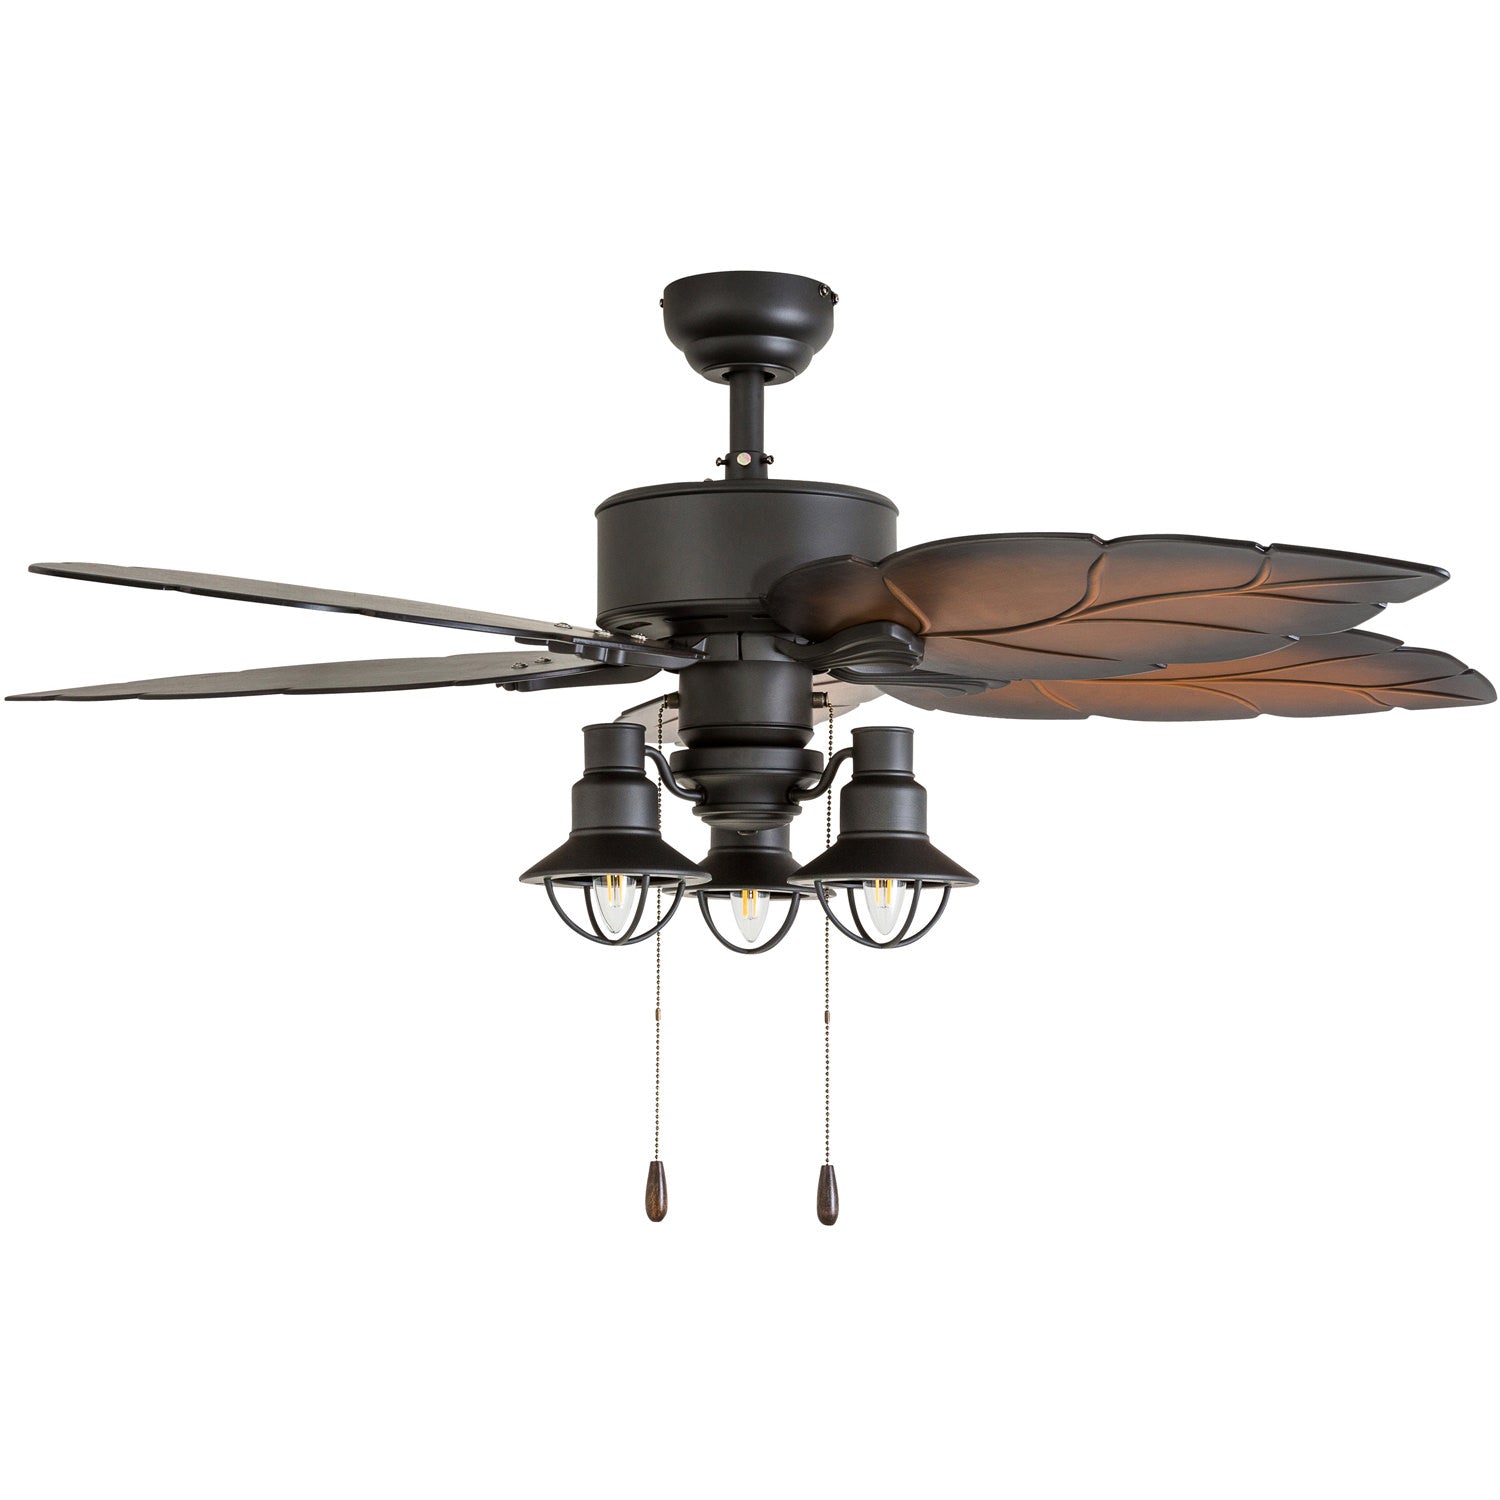 52 Inch Ocean Crest, Bronze, Remote Control, Indoor/Outdoor Ceiling Fan by Prominence Home